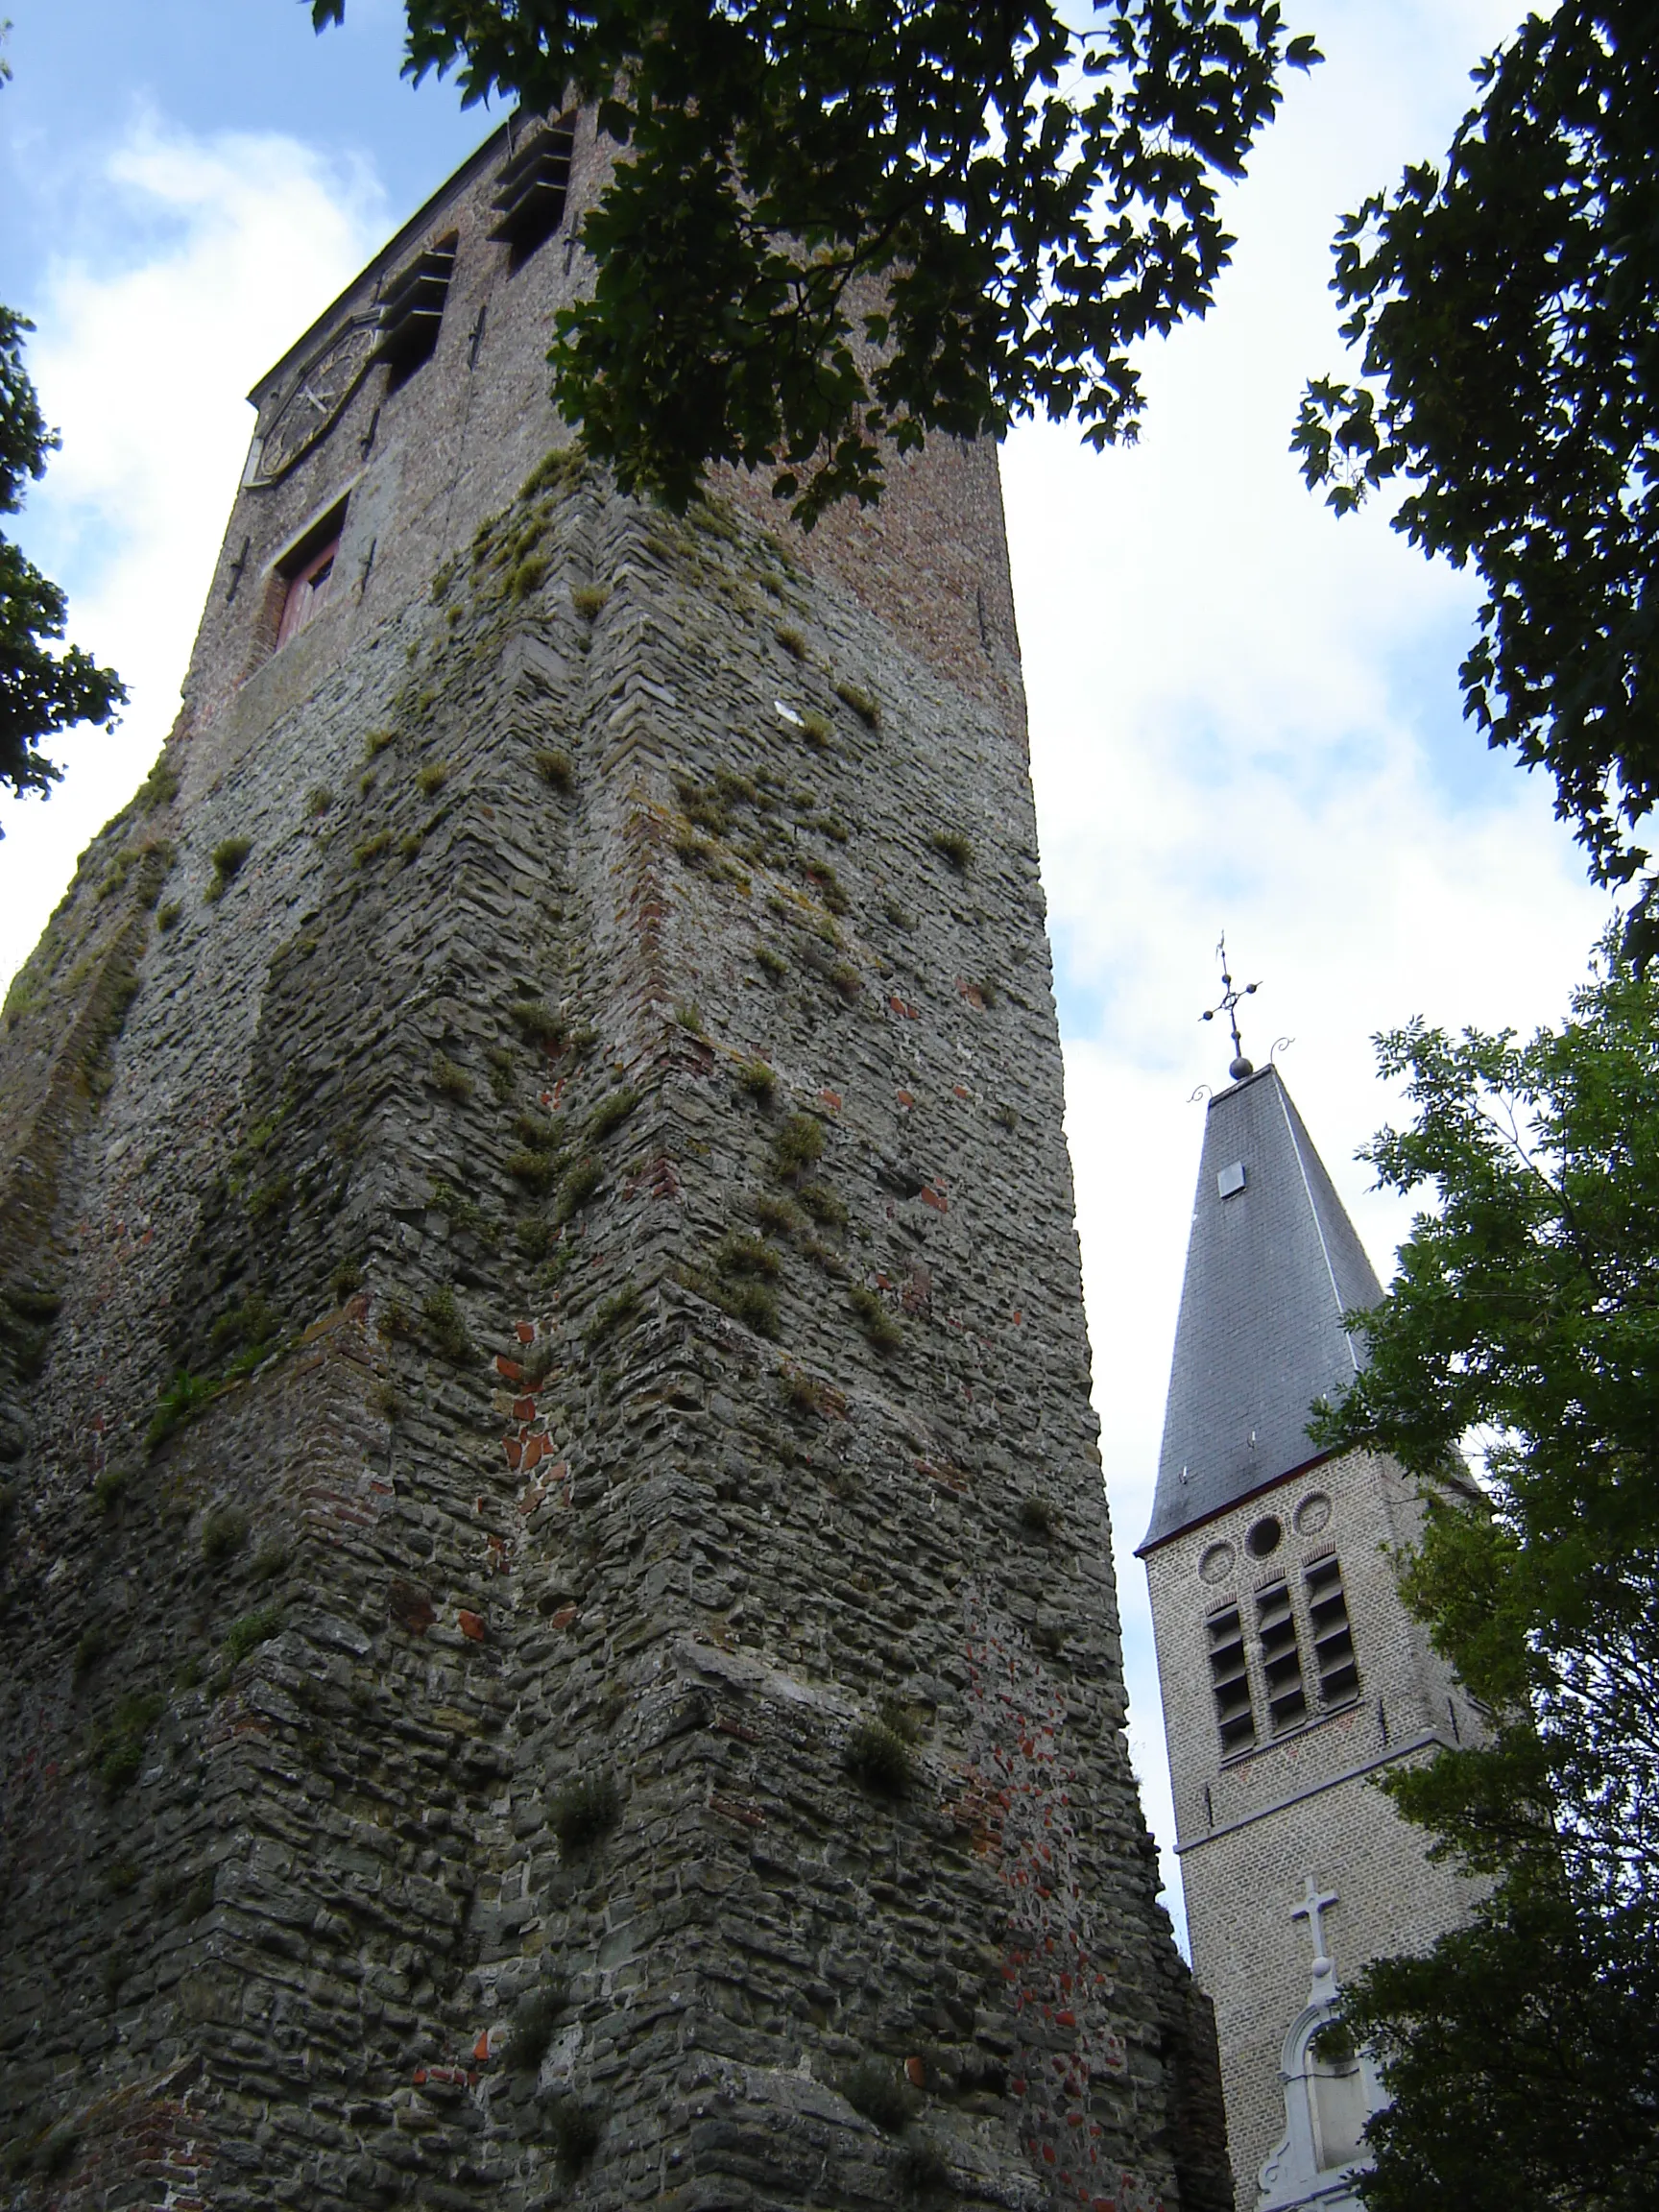 Photo showing: Old and new tower of the church of Saint Peter in Chains in Dudzele, Brugge, West-Flanders, Belgium.